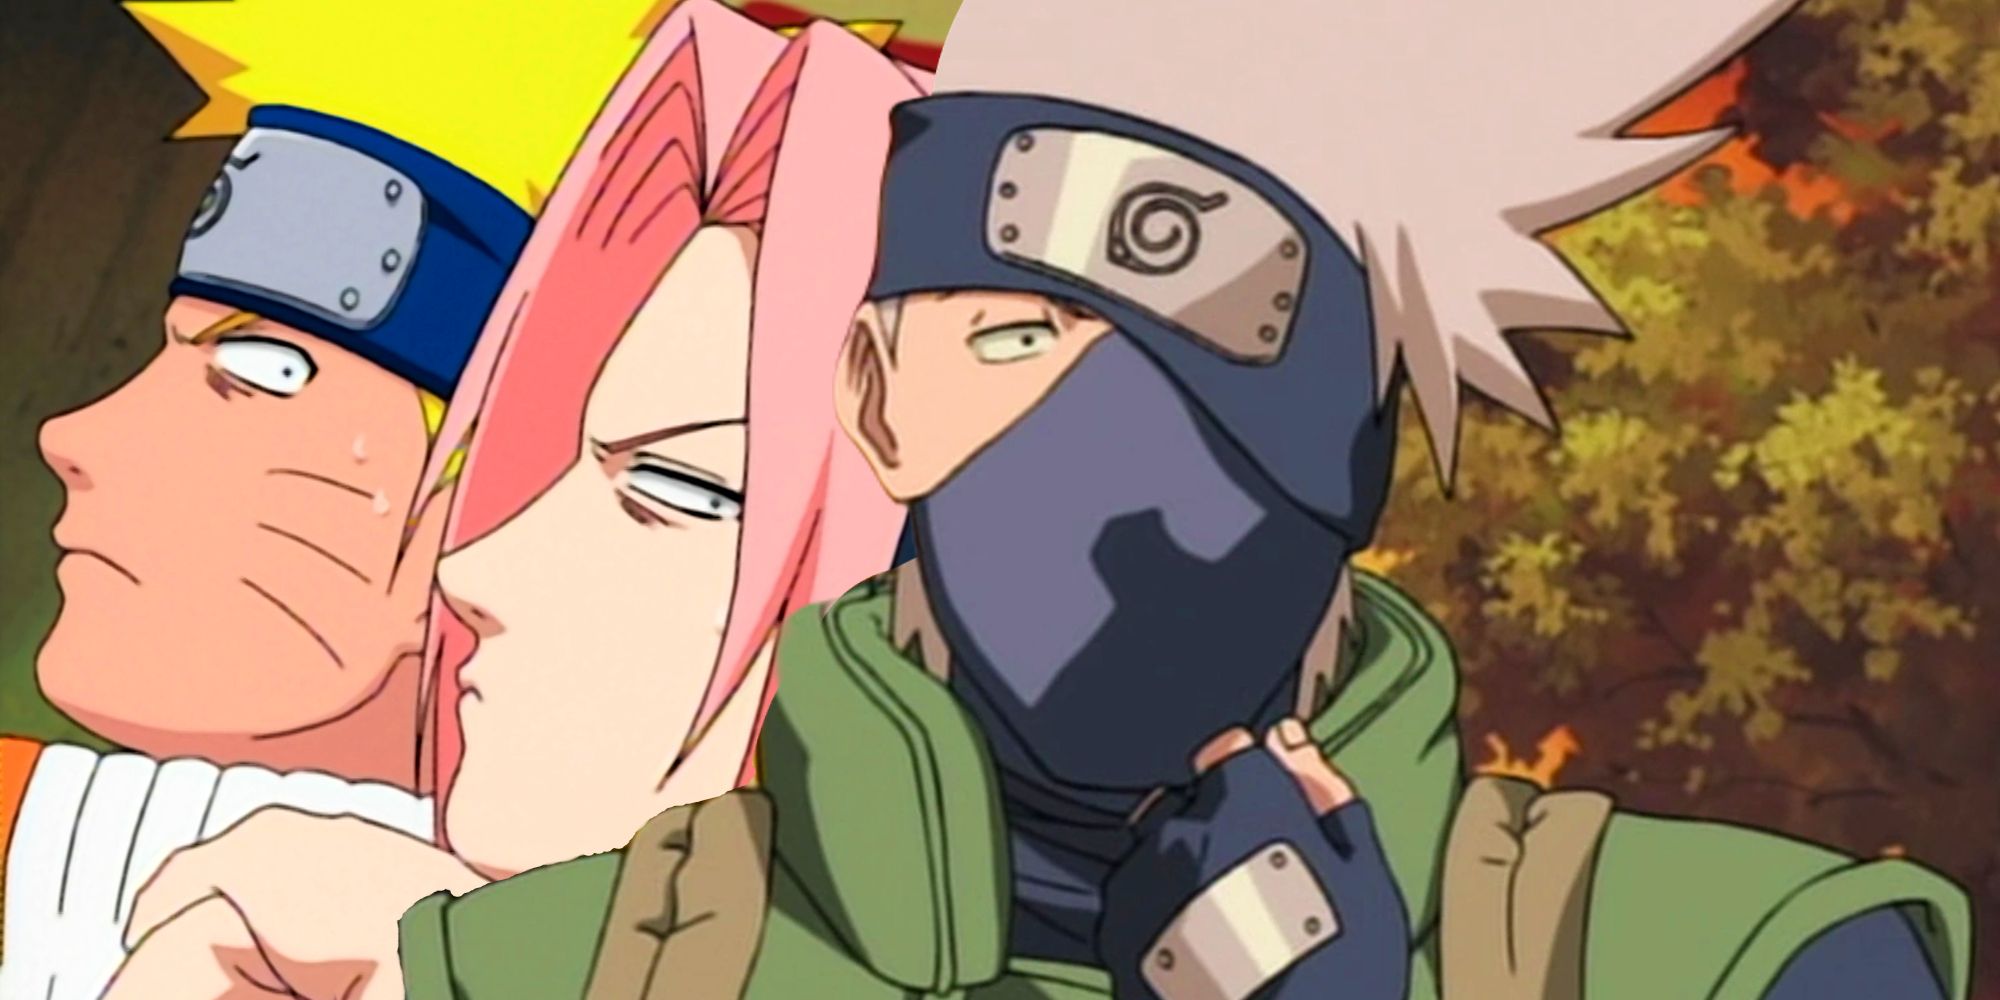 Is it true, Kakashi Hatakes Real Face!, I found a picture o…